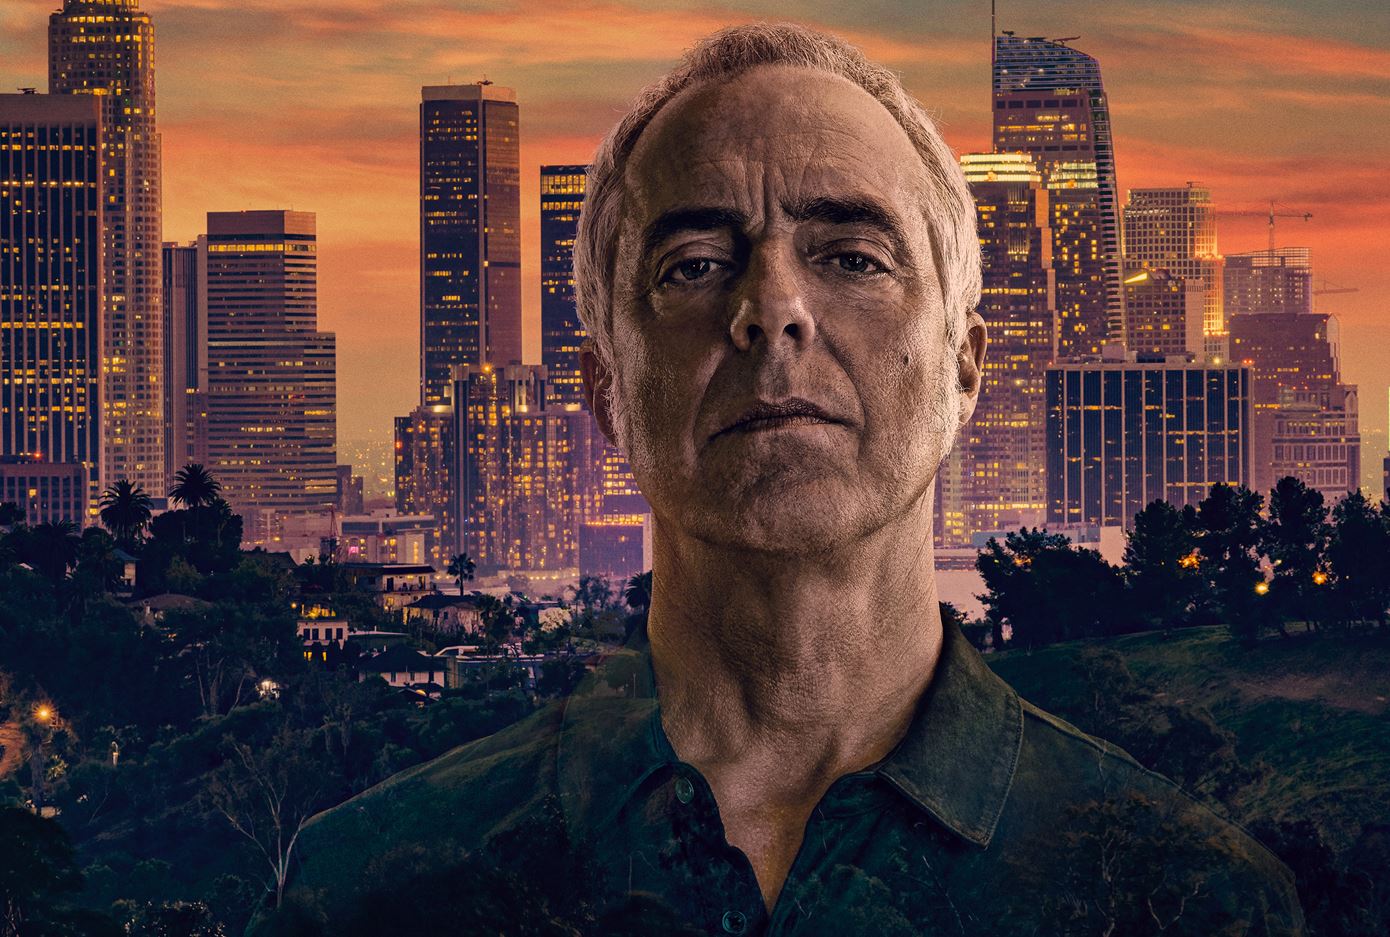 Detective Harry Bosch makes his last stand in final season